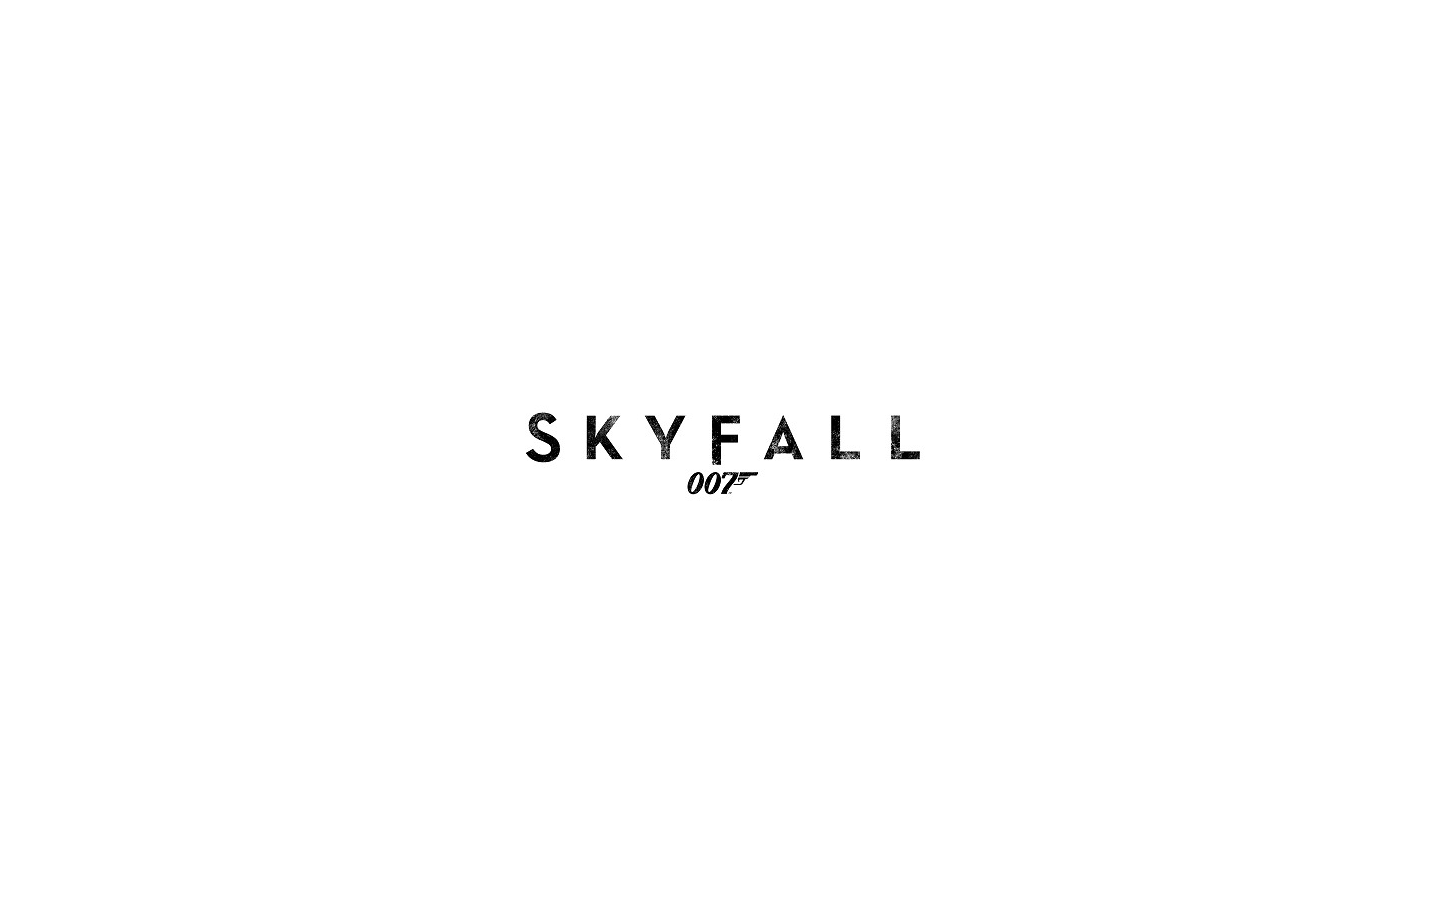 Central Wallpaper: Skyfall 007 Movie Poster HD Wallpapers